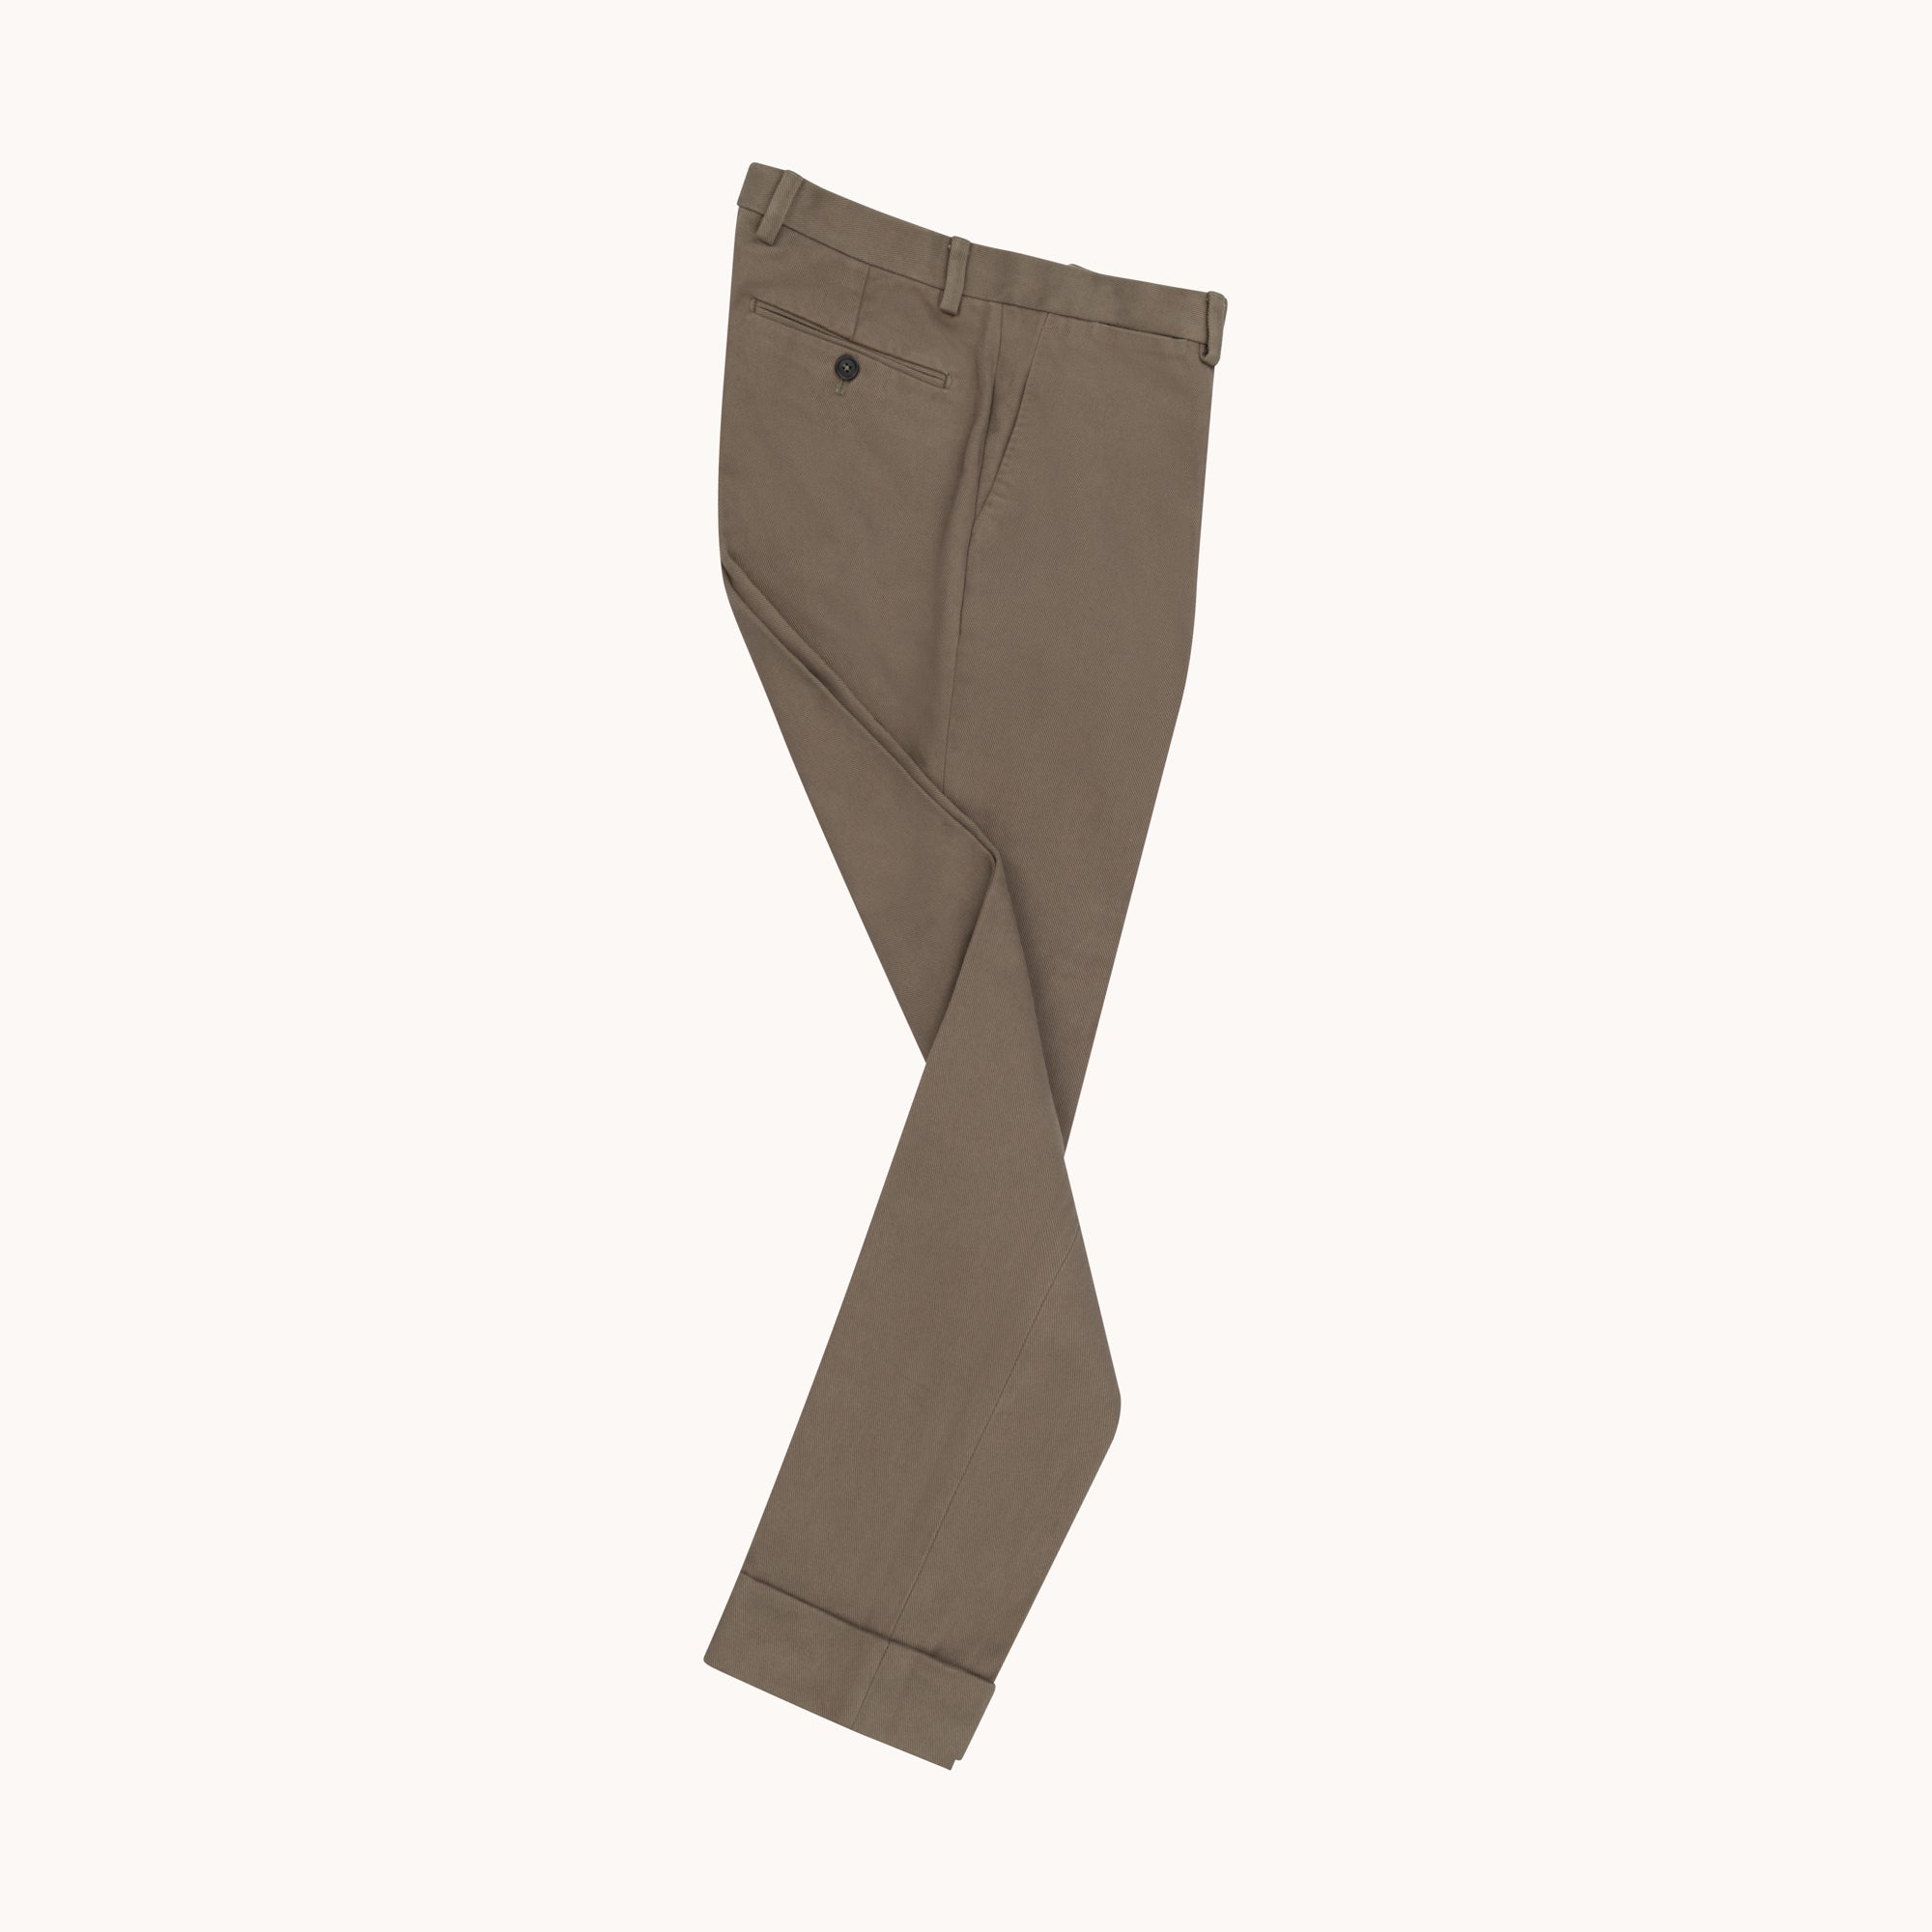 Garment Washed Flat Front Trouser - Lovat Cotton Drill